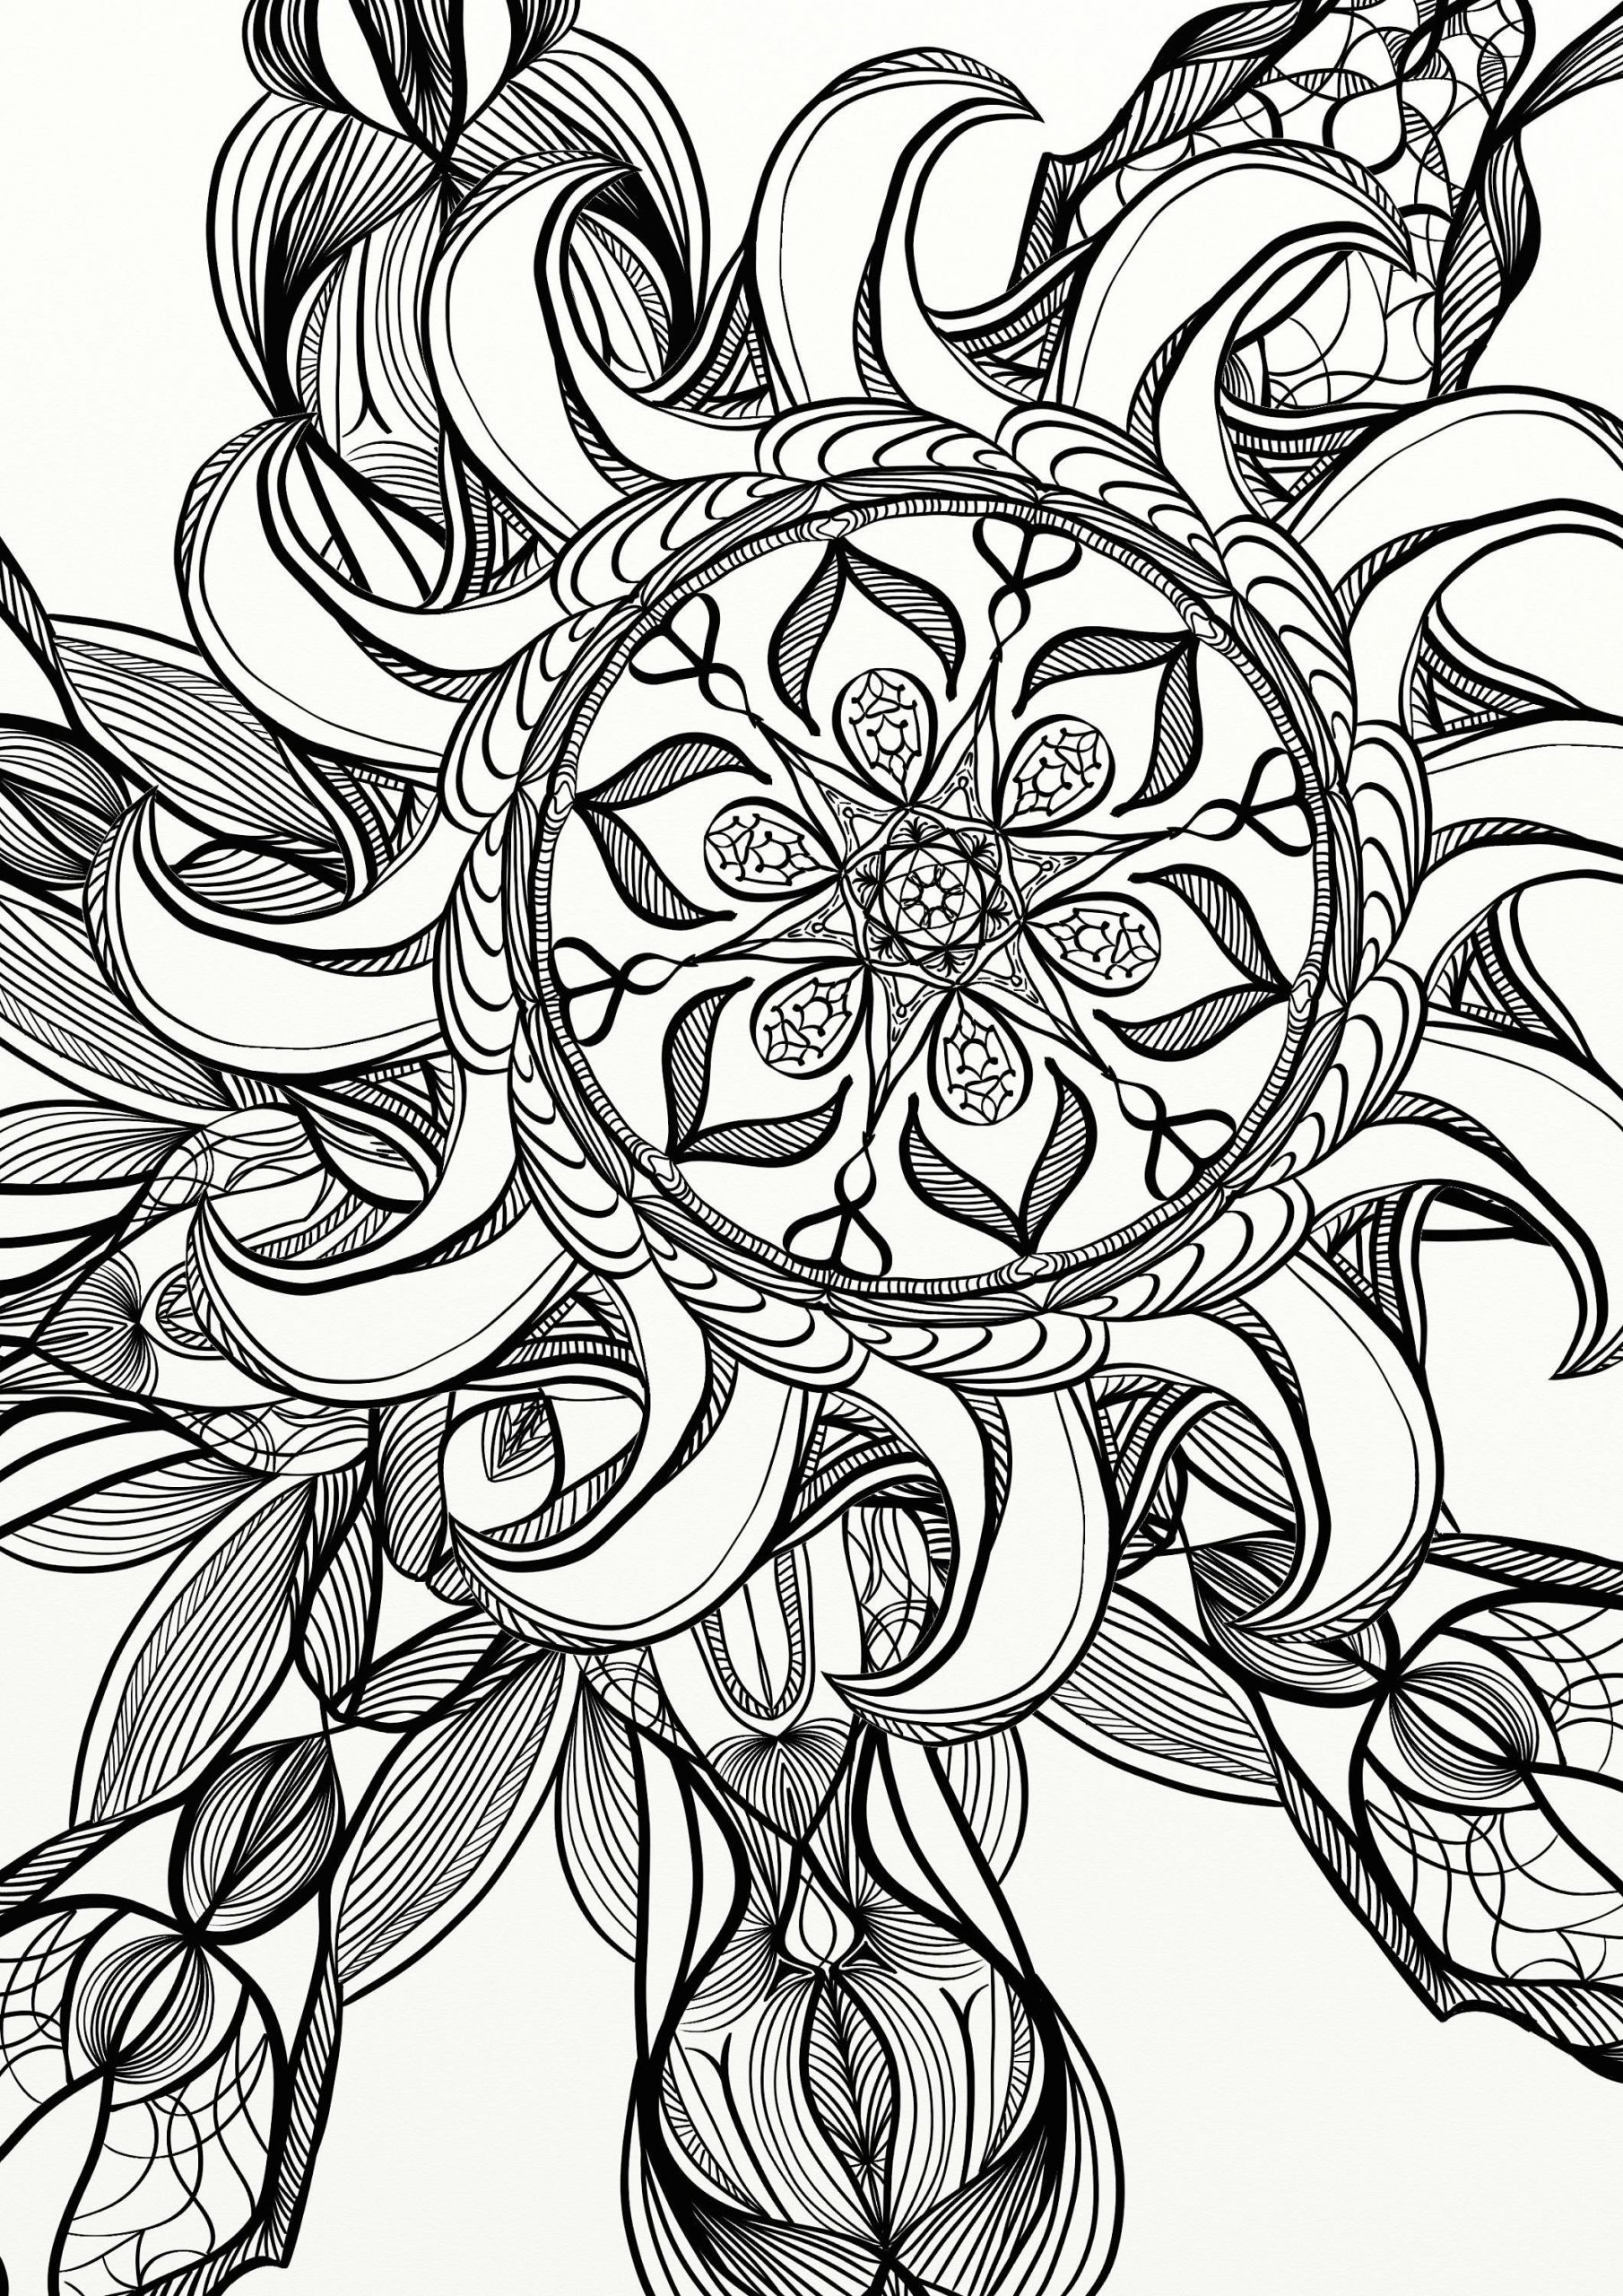 Coloring Book Adults
 Mandala Spiral Relaxing Adult Coloring Page